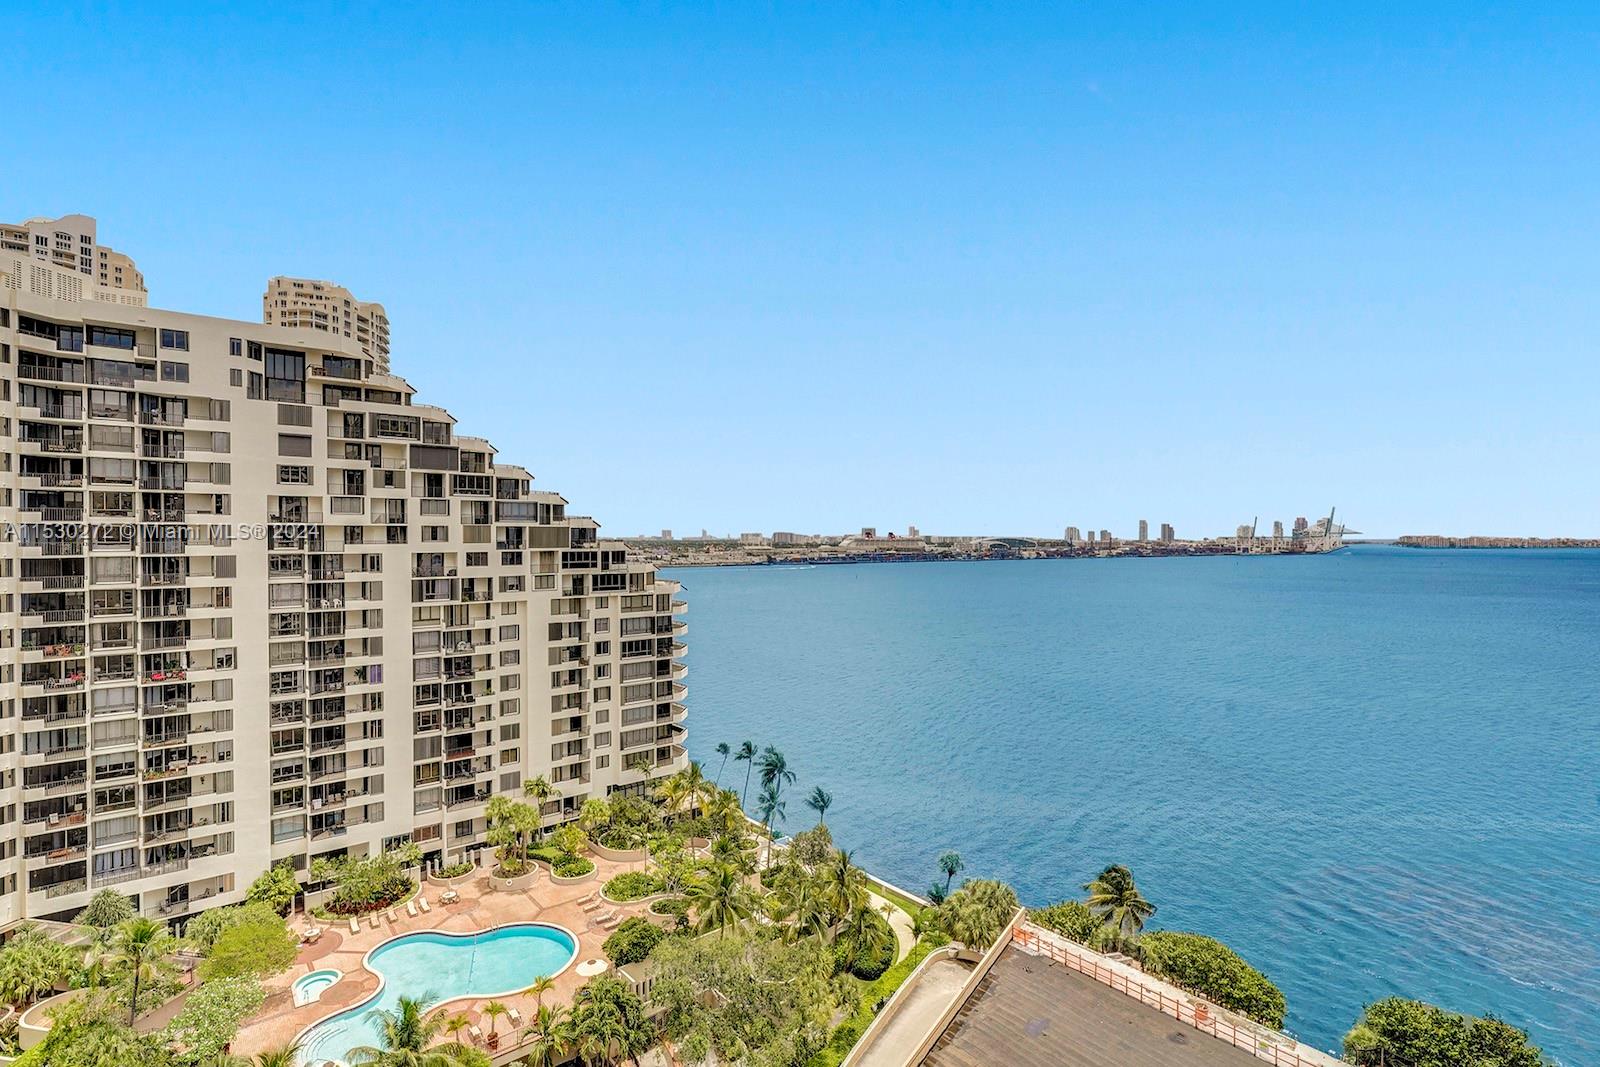 Magnificent 2bed/2bath condo with beautiful bay and city views at Brickell Key! Completely renovated; new baths, new kitchen with stainless steel appliances, European style cabinets, molding, wood and marble floors. This gem has lots of natural light, split plan, 2 assigned parking spaces and new AC. Building features valet service, 24hr security, two tennis courts, heated swimming pool & spa, waterfront fitness center & club room with billiards, business center with conference room, 24hr concierge, valet and more. Walking distance to Brickell City Centre, restaurants & parks and minutes to main highways, Miami Beach and downtown. New pool and recently remodeled amenities.